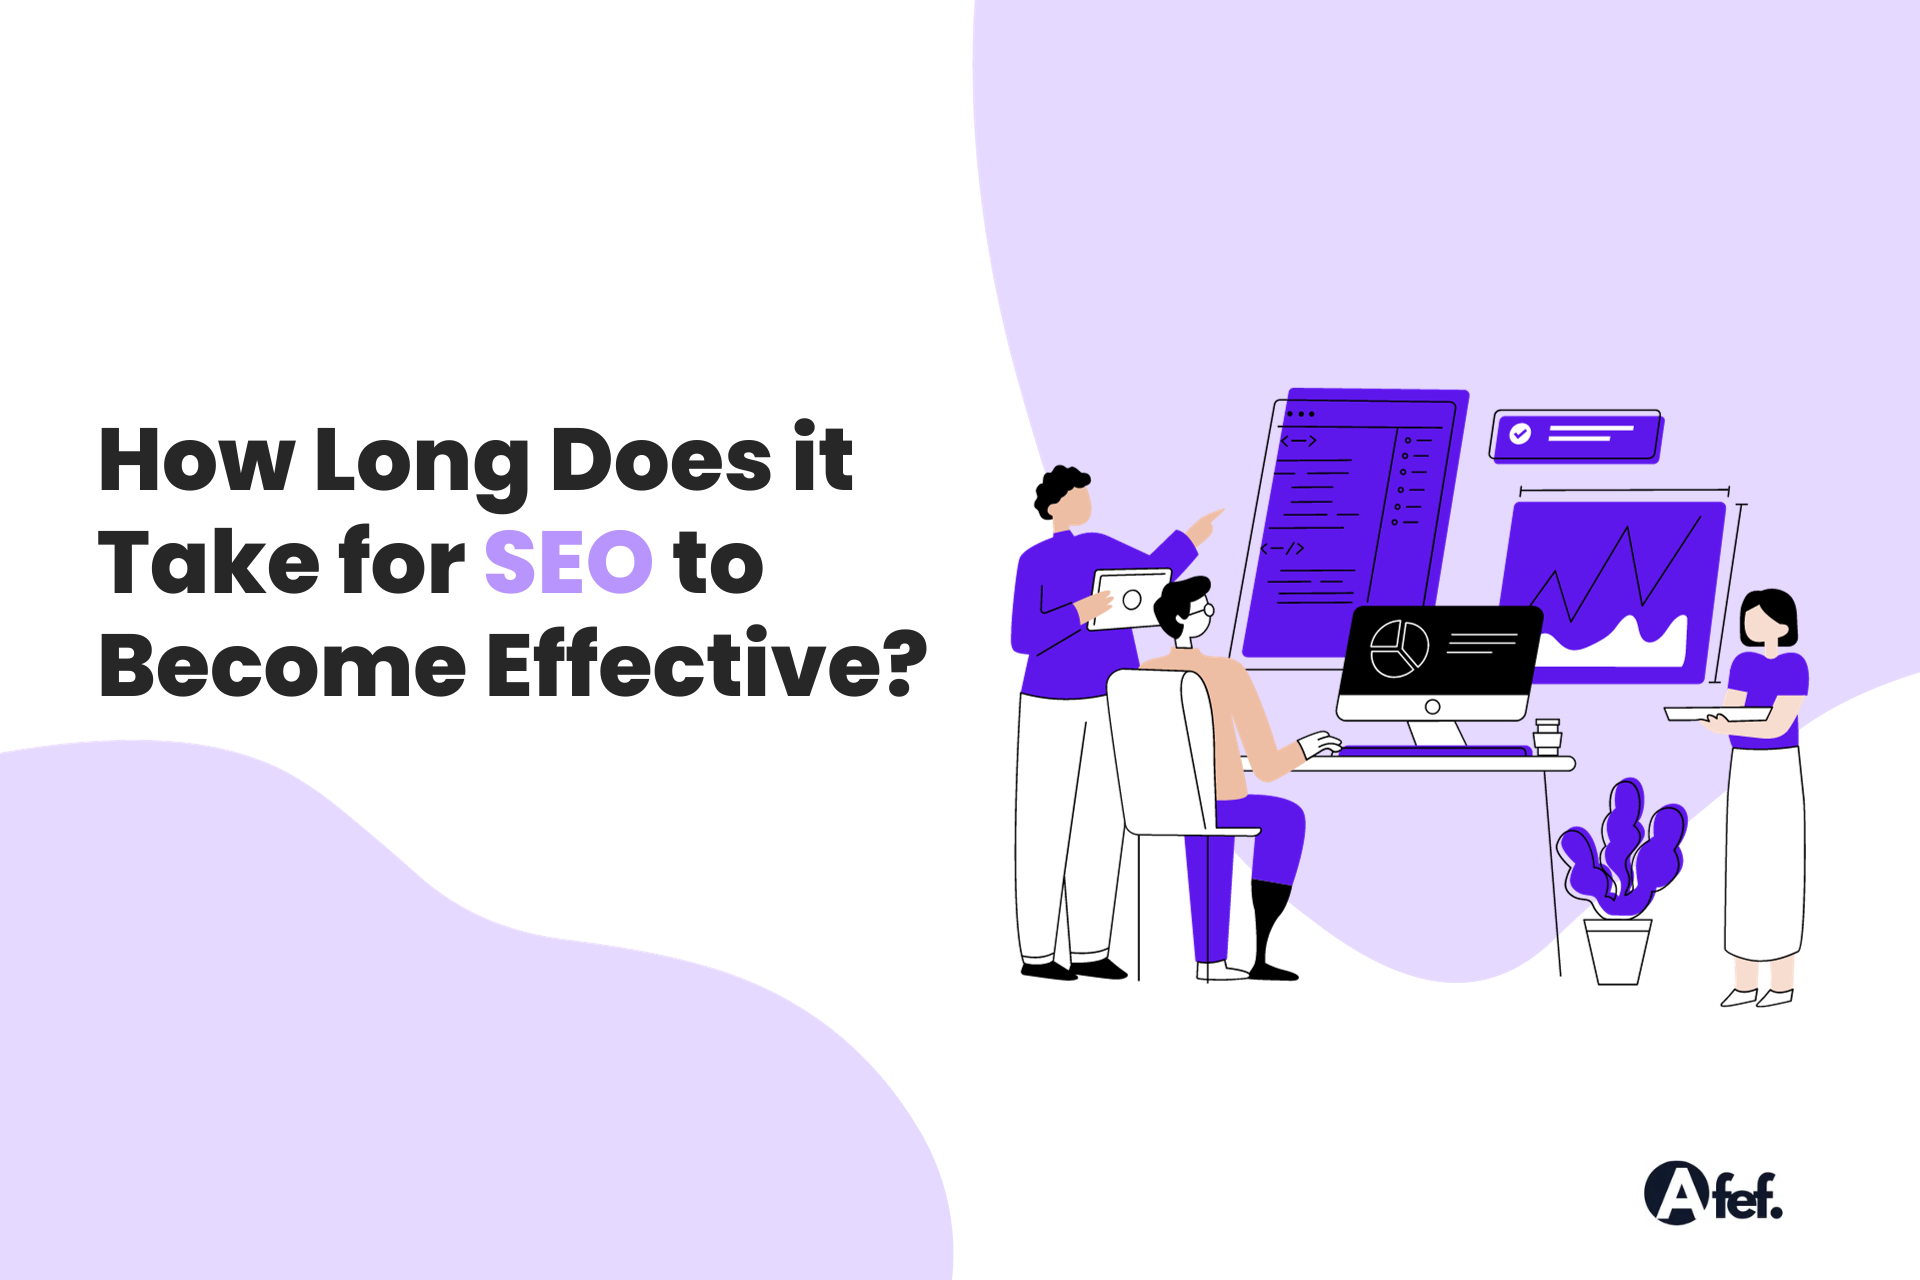 How Long Does it Take for SEO to Become Effective?